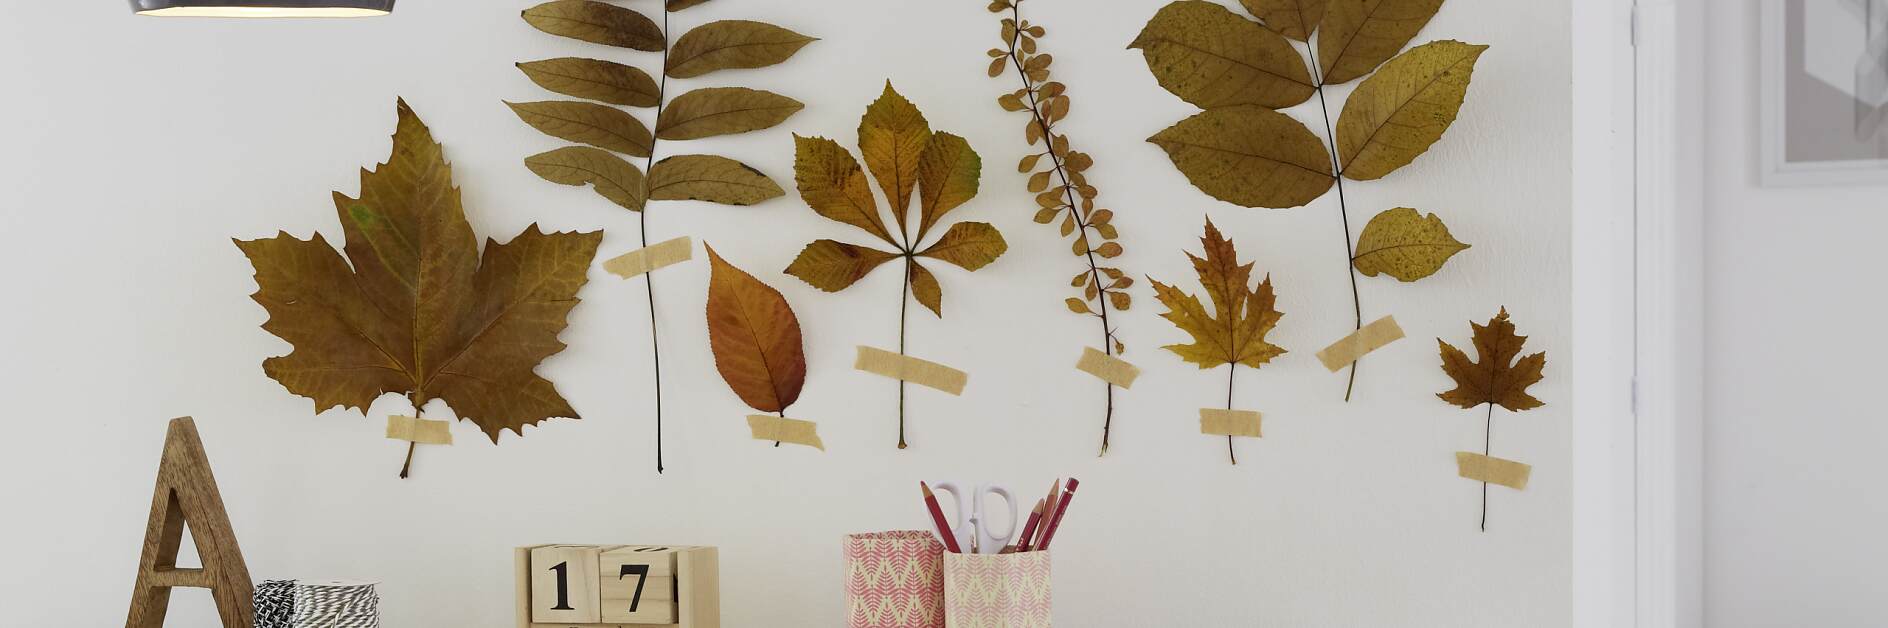 Fall Leaves on the Wall - How We Do It